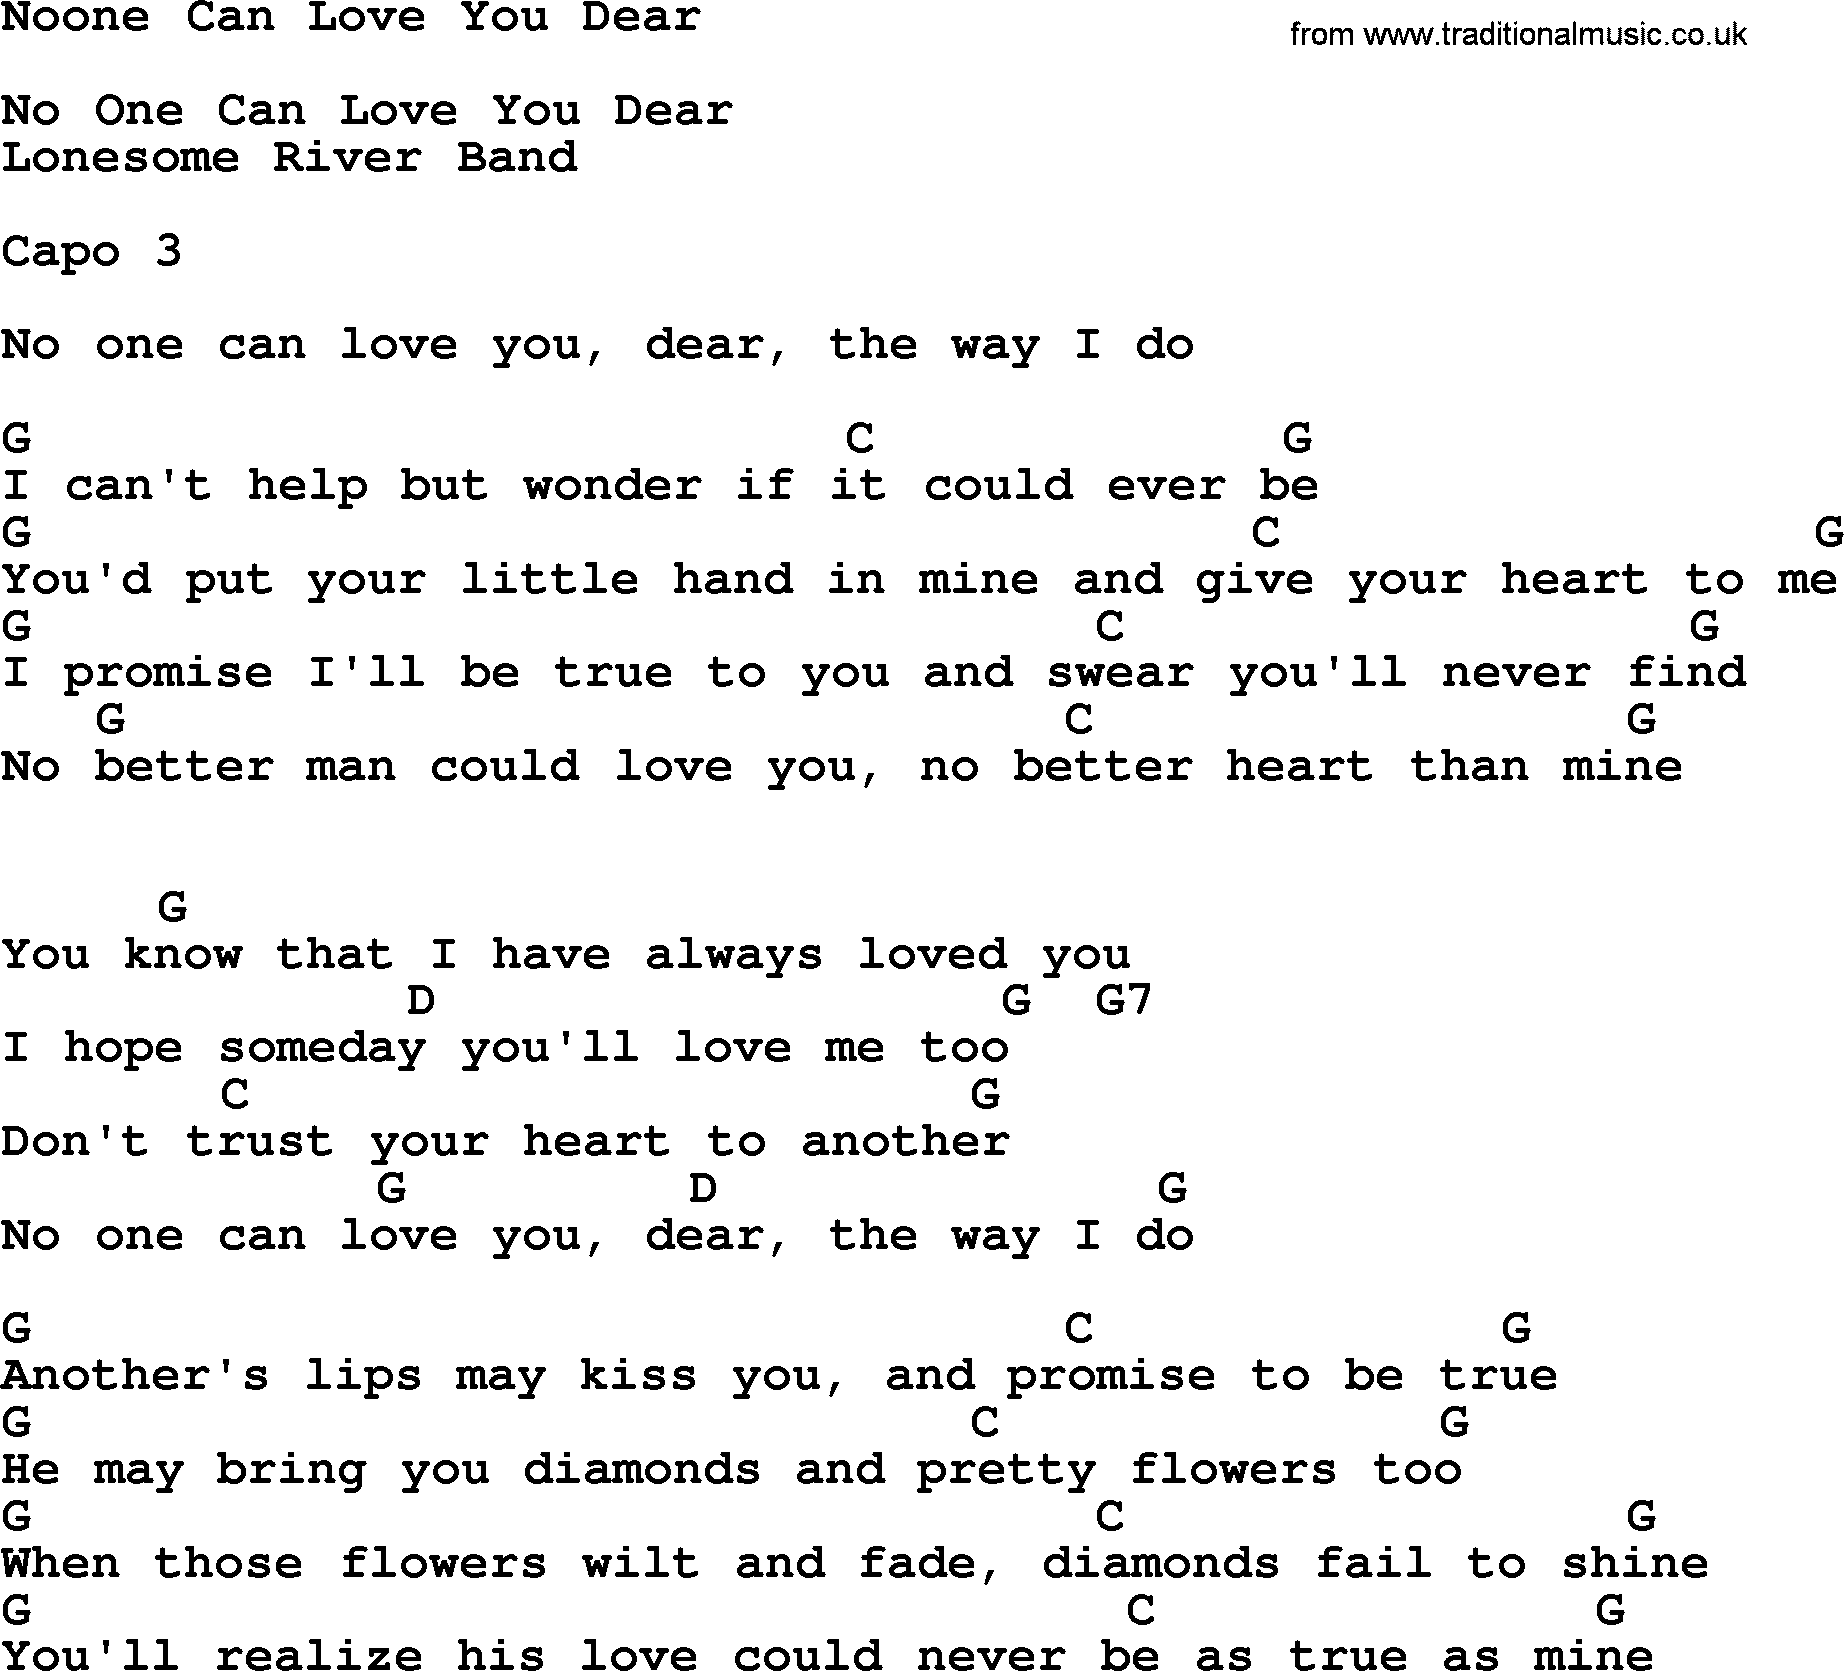 Bluegrass song: Noone Can Love You Dear, lyrics and chords